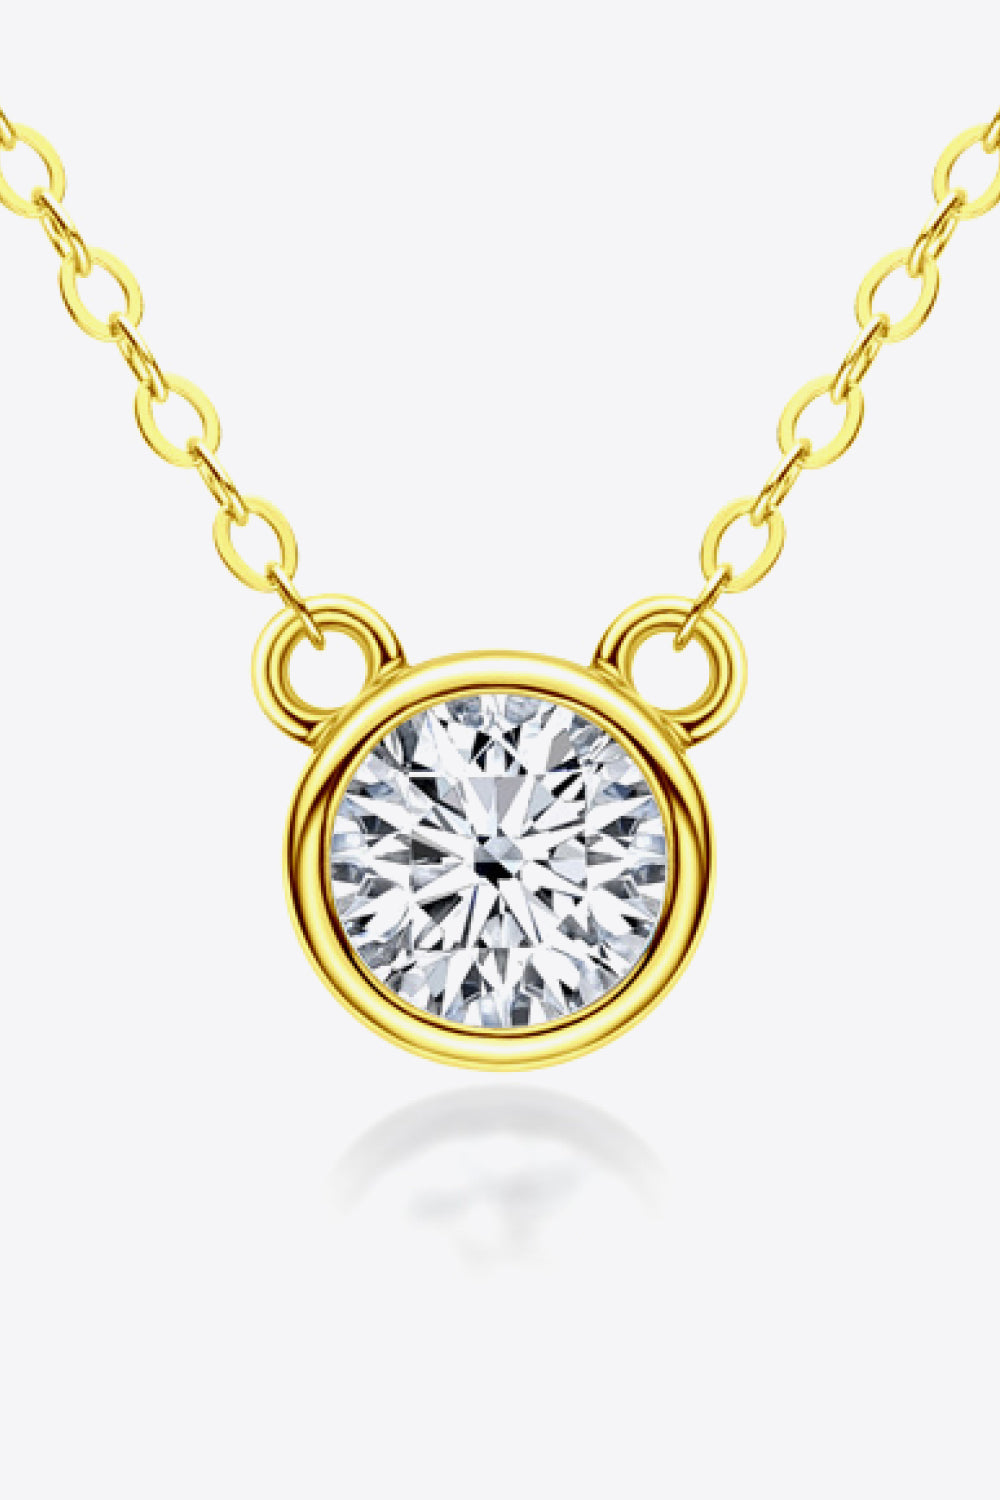 925 Sterling Silver 1 Carat Moissanite Round Pendant Necklace - Necklaces - FITGGINS